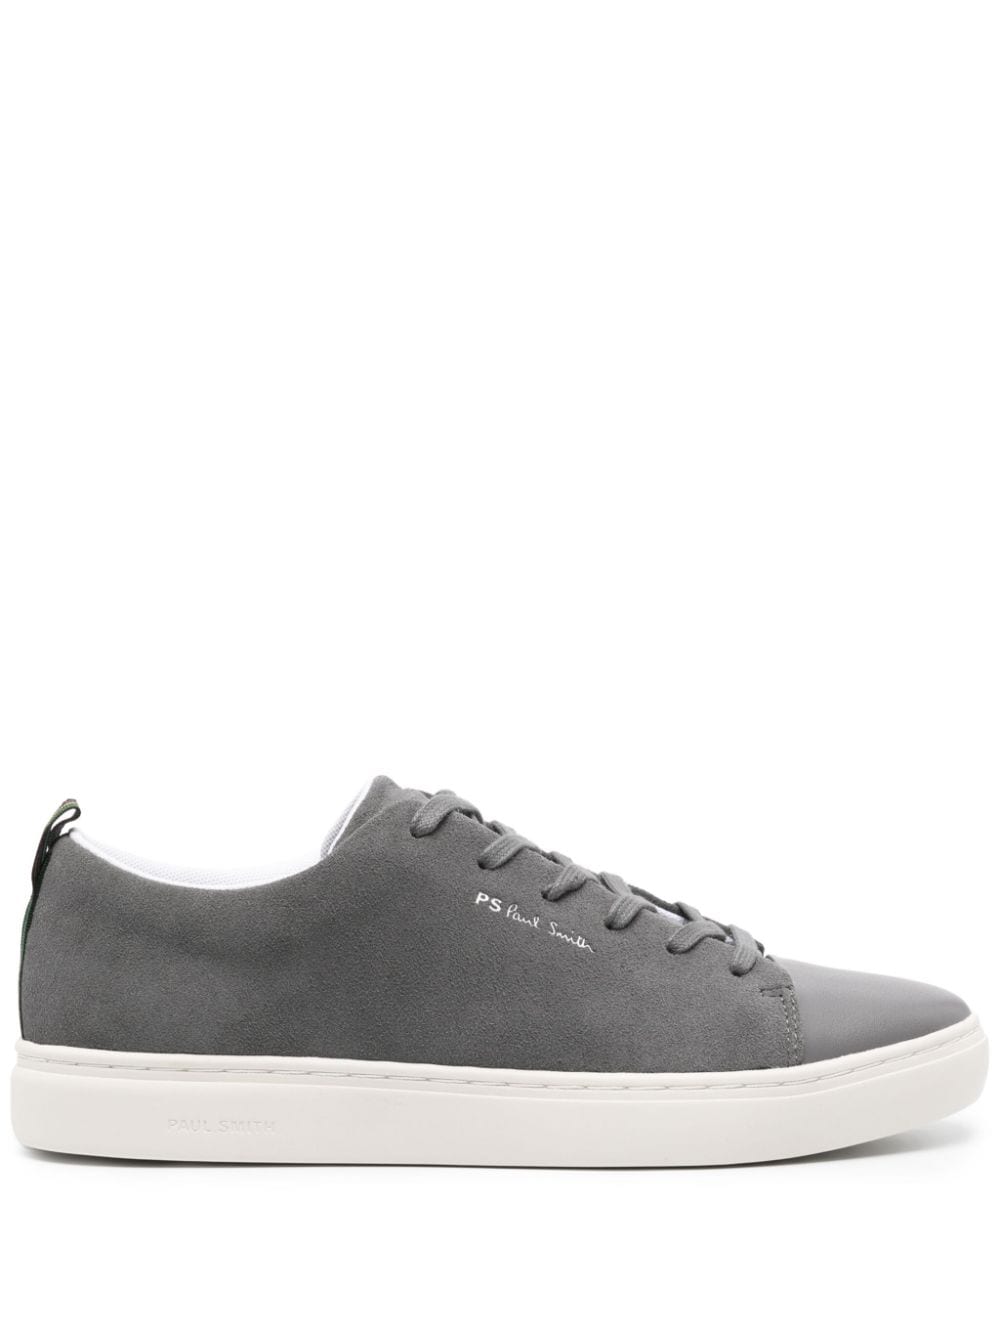 Shop Ps By Paul Smith Lee Suede Sneakers In Grey